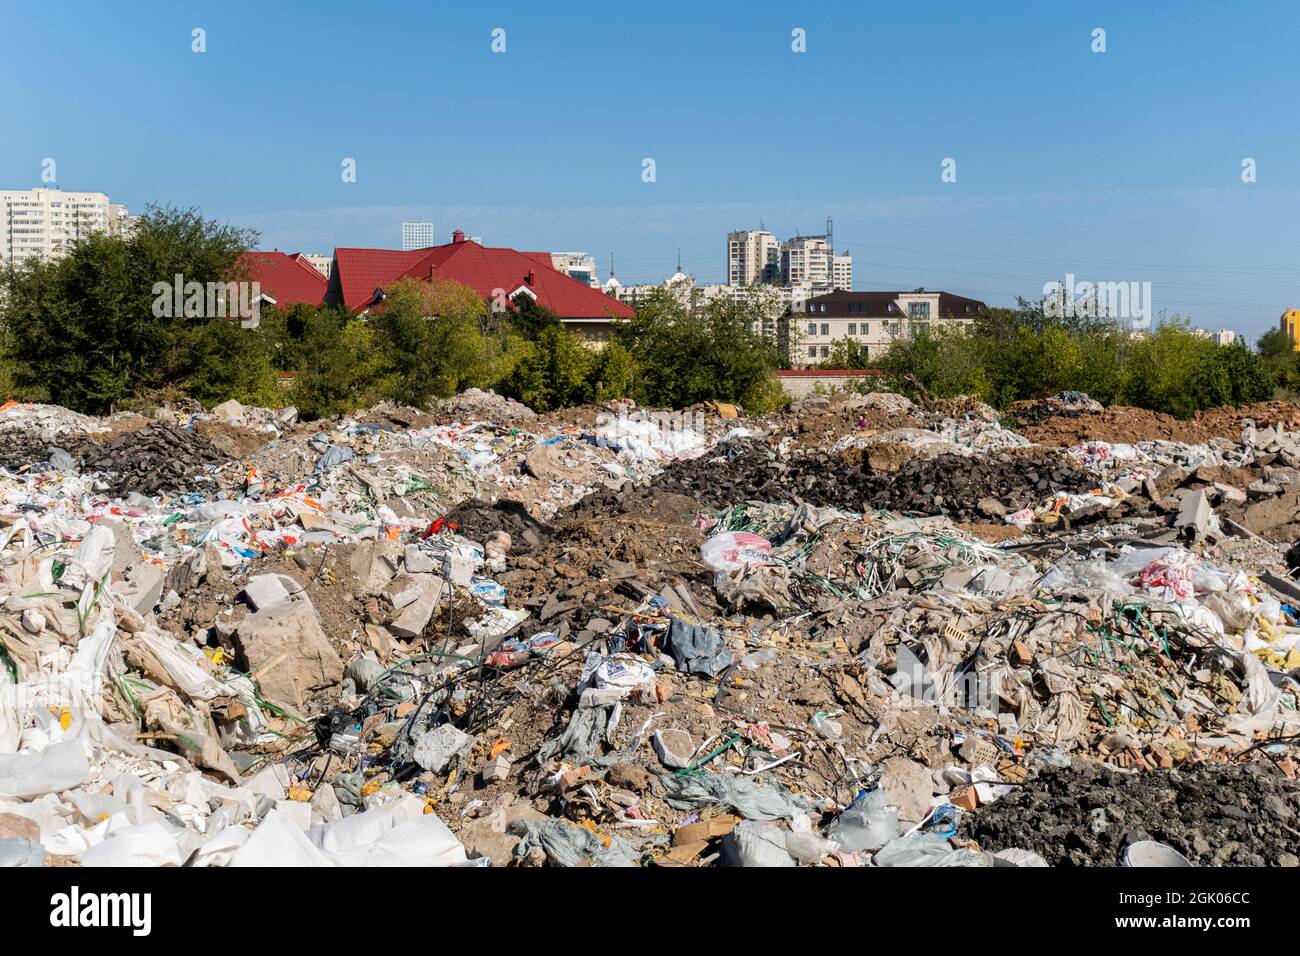 Сonstruction waste dumped in the developing area of city- concept: ecology, environment and pollution; Nur-Sultan, Kazakhstan, Central Asia Stock Photo